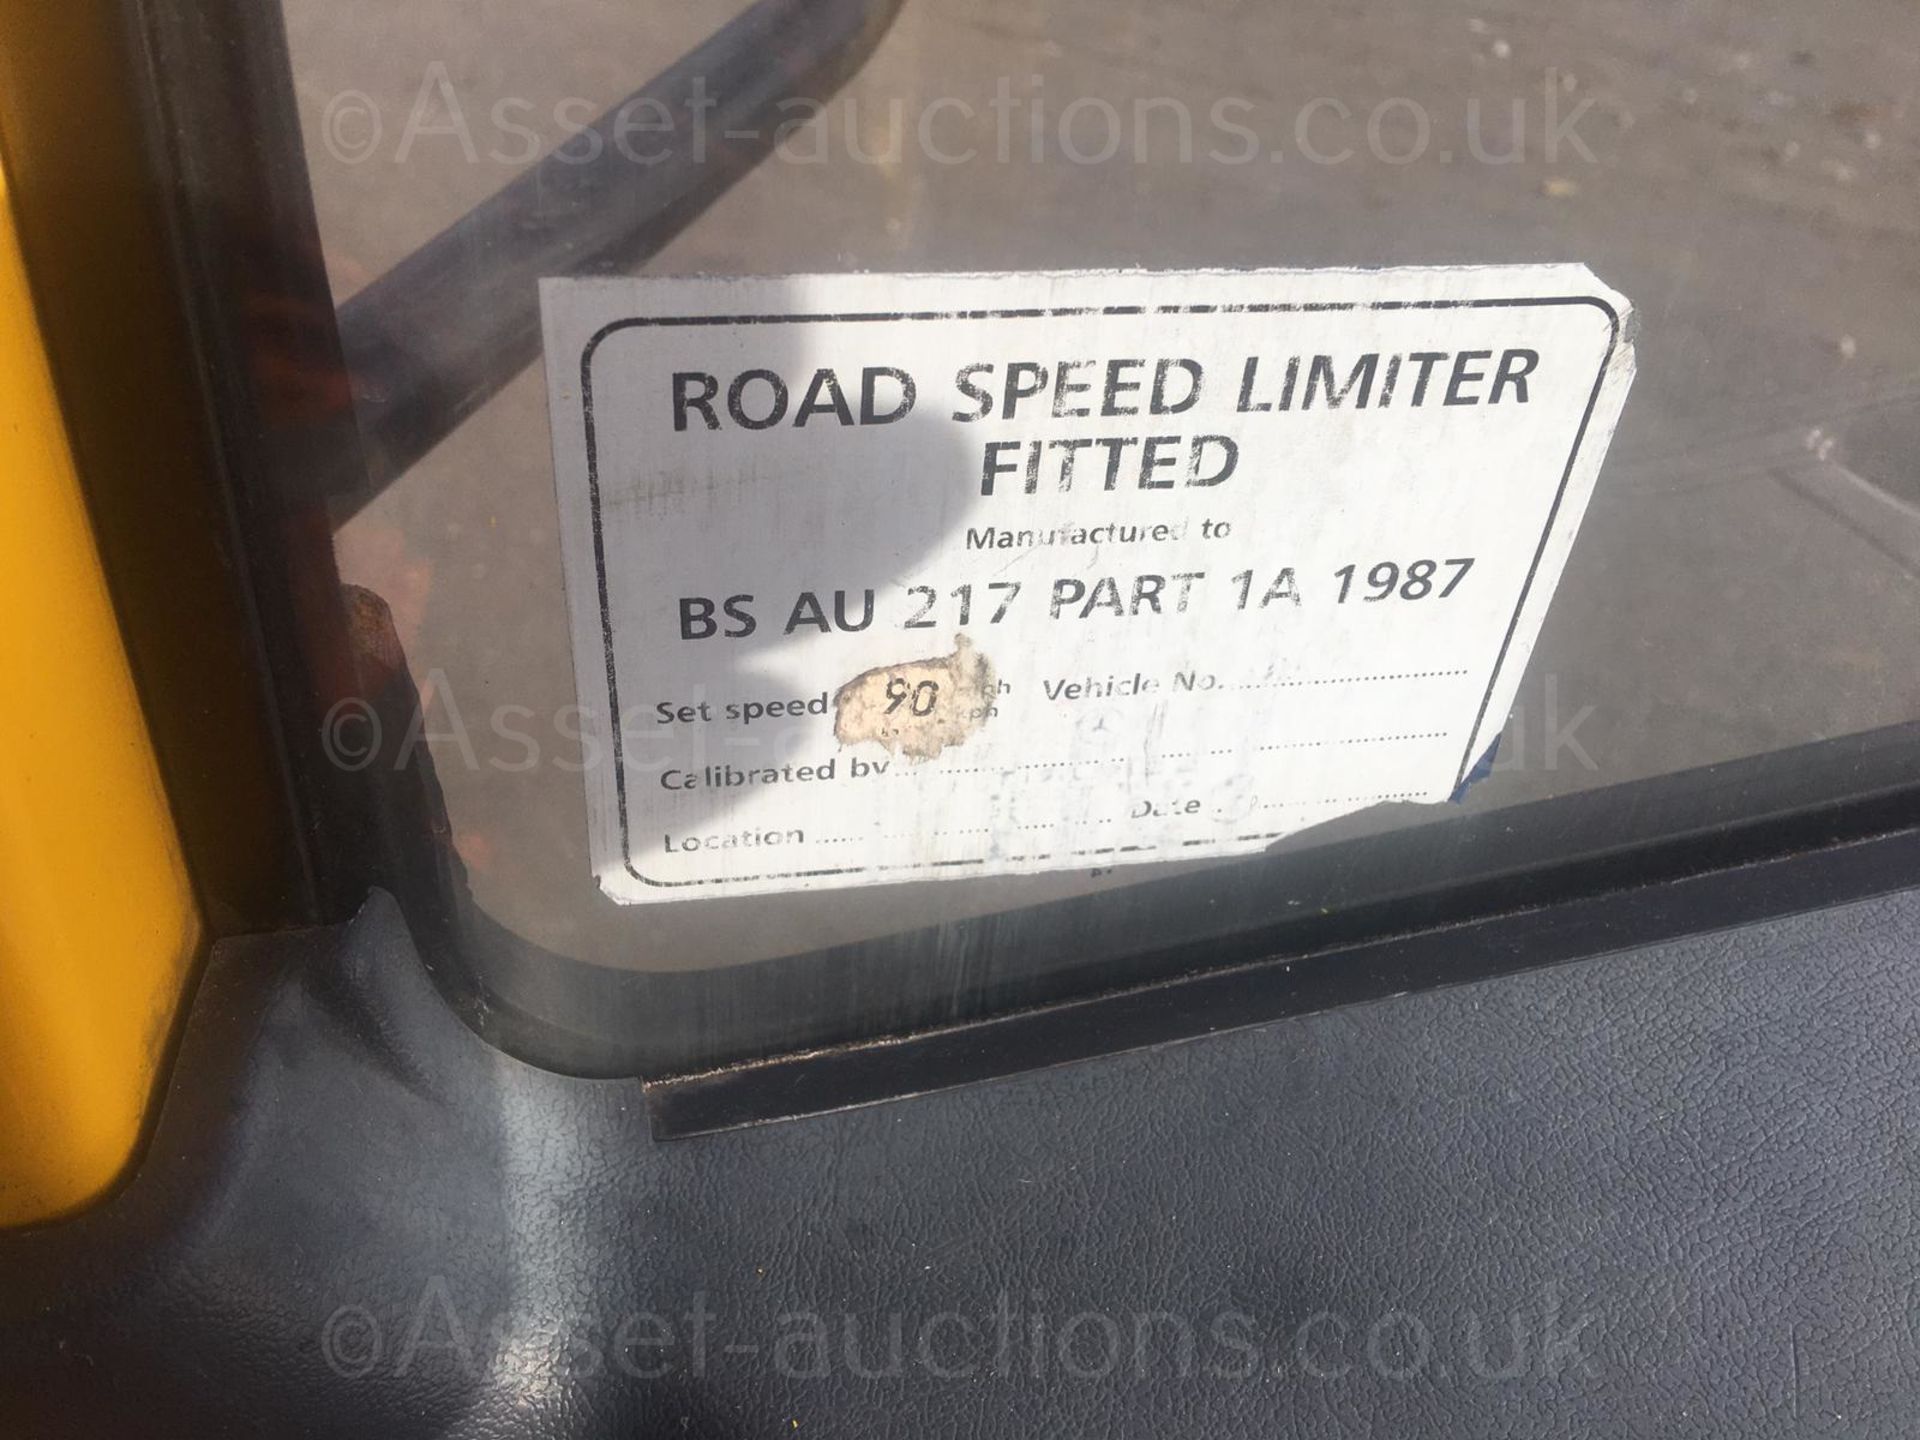 2004/54 REG MERCEDES ATEGO 1018 DAY YELLOW DROPSIDE LINE PAINTING LORRY 4.3L DIESEL ENGINE *NO VAT* - Image 62 of 128